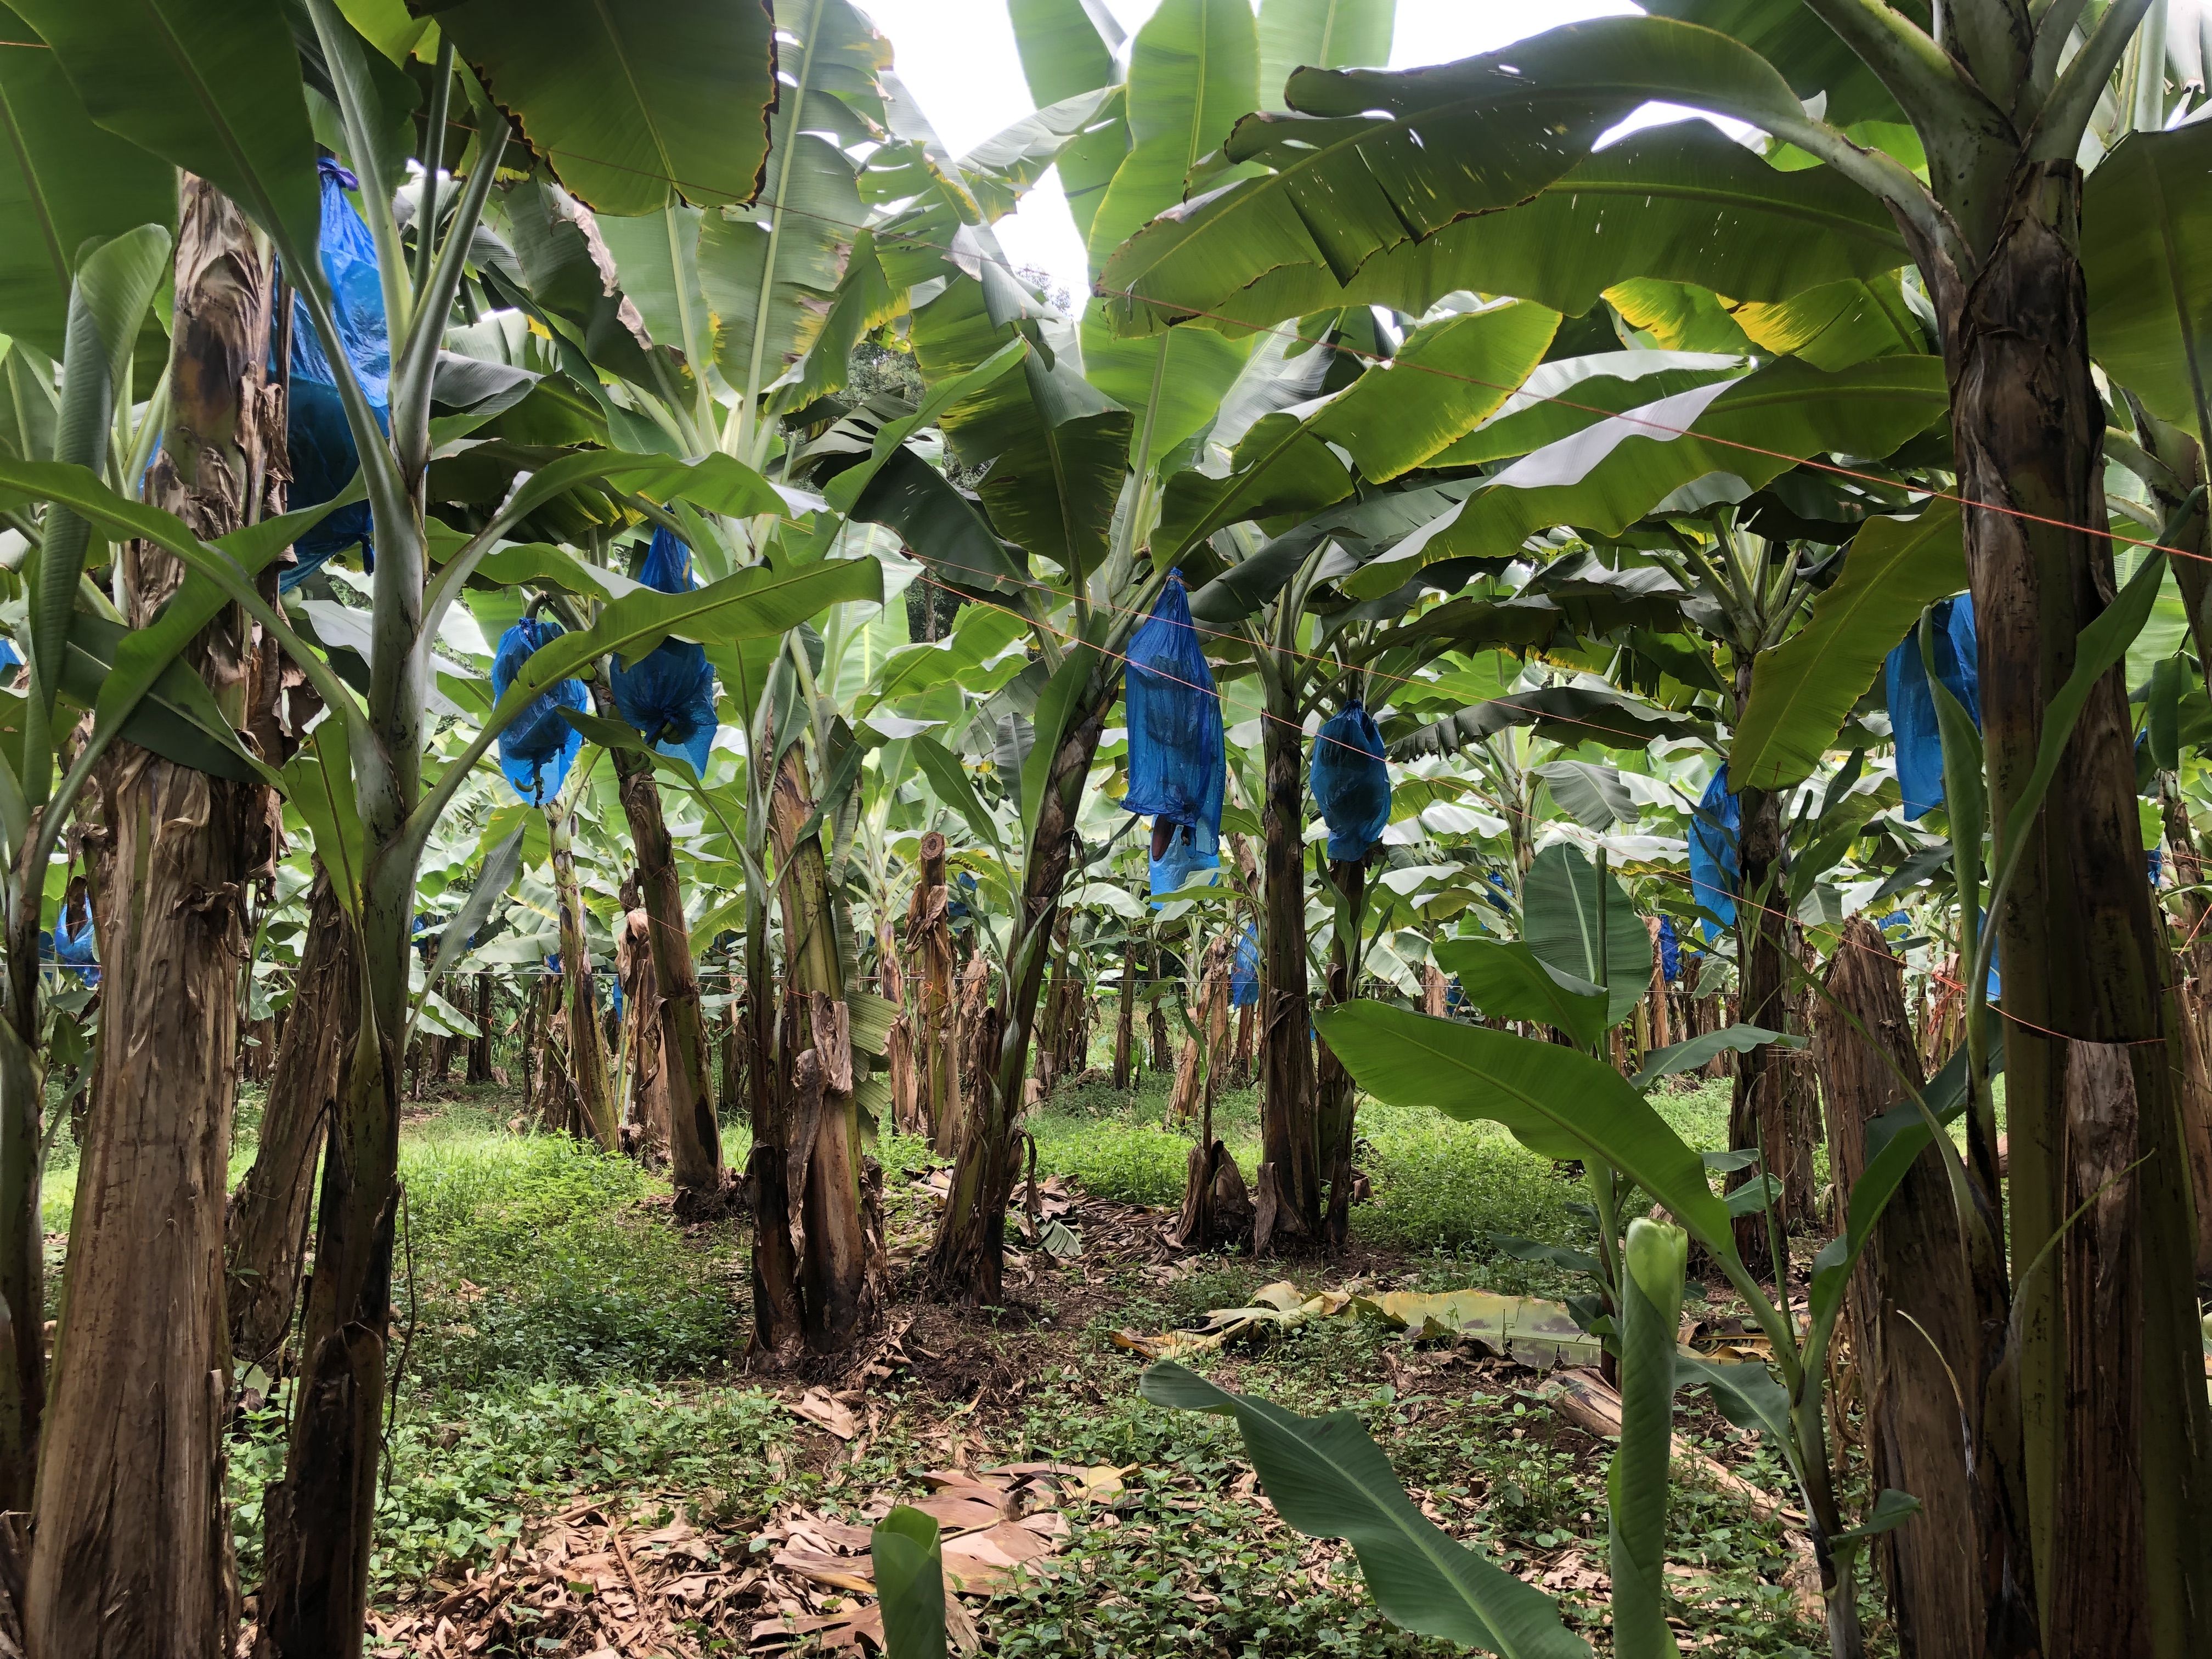 Bananas are wrapped in natural insect-repelling bags made with hot pepper and garlic at Earth University. The insecticidal bags are removed from the bananas here in the processing facility at Rio Sixaola Plantation. Image by Madison Stewart. Costa Rica, 2019.